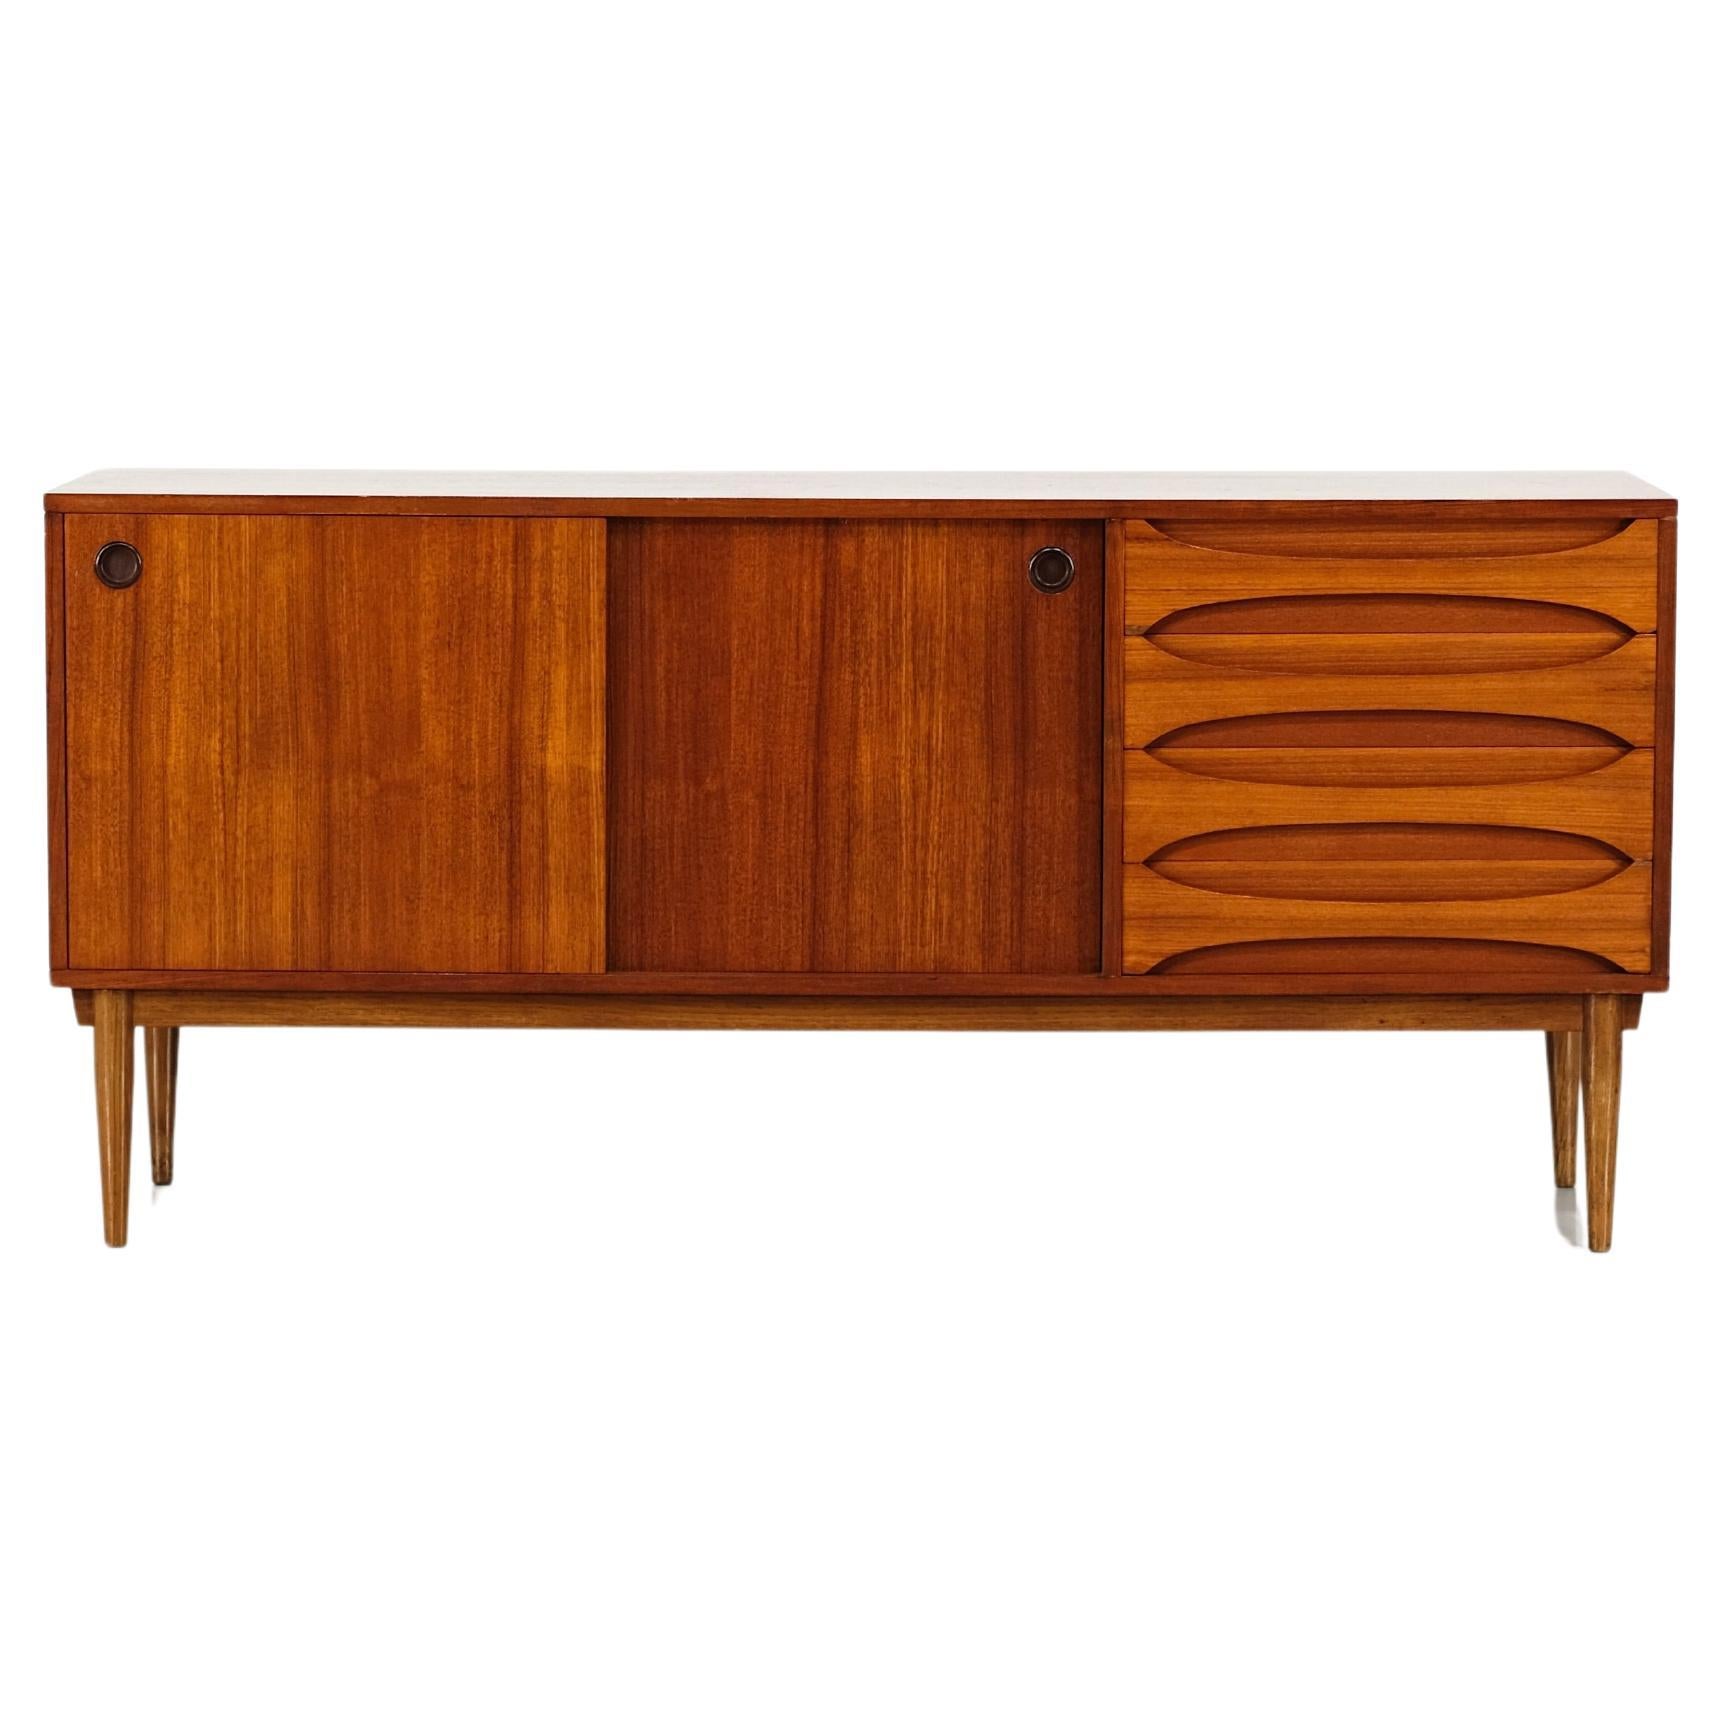  Sideboard in Wood medium size 1960's For Sale